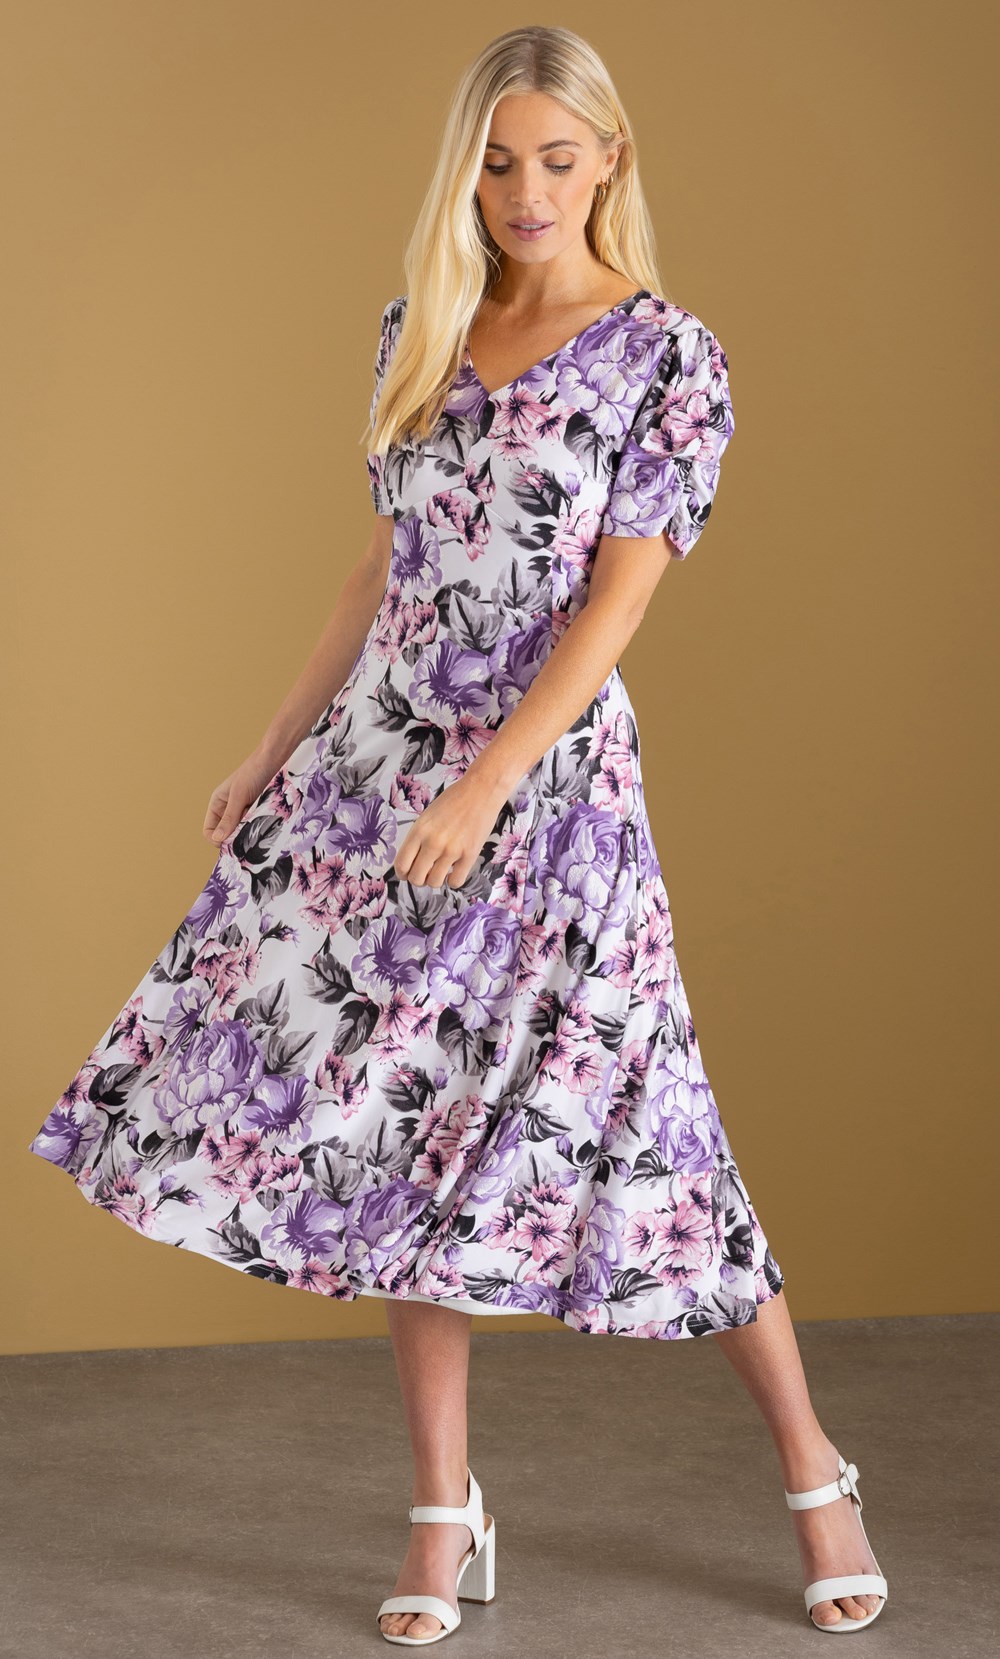 Textured Floral Print Ity Dress